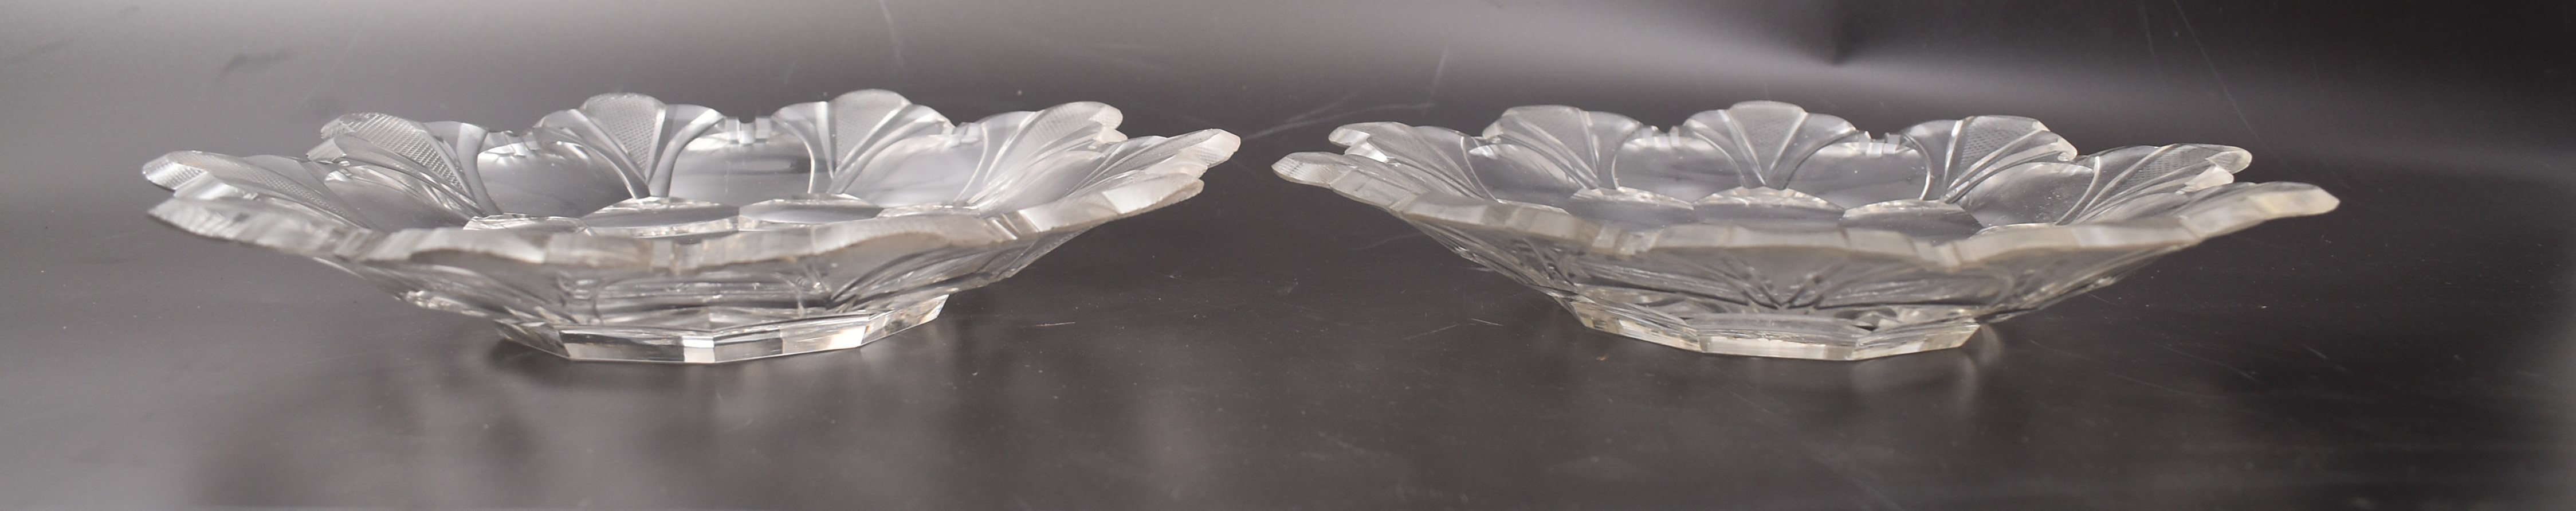 PAIR OF EARLY 19TH CENTURY IRISH CUT GLASS DISHES - Image 2 of 4